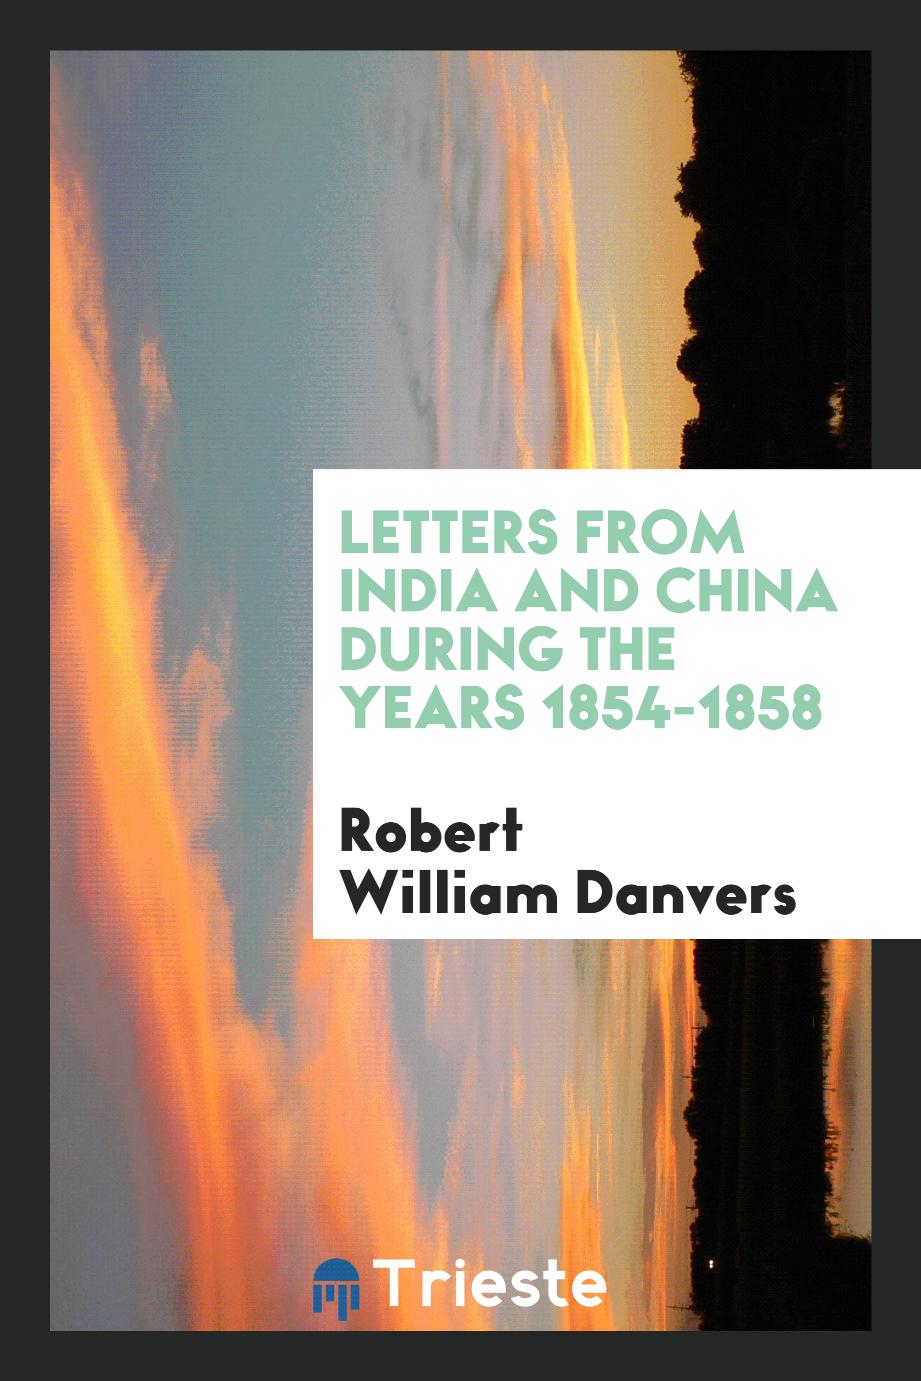 Letters from India and China during the years 1854-1858